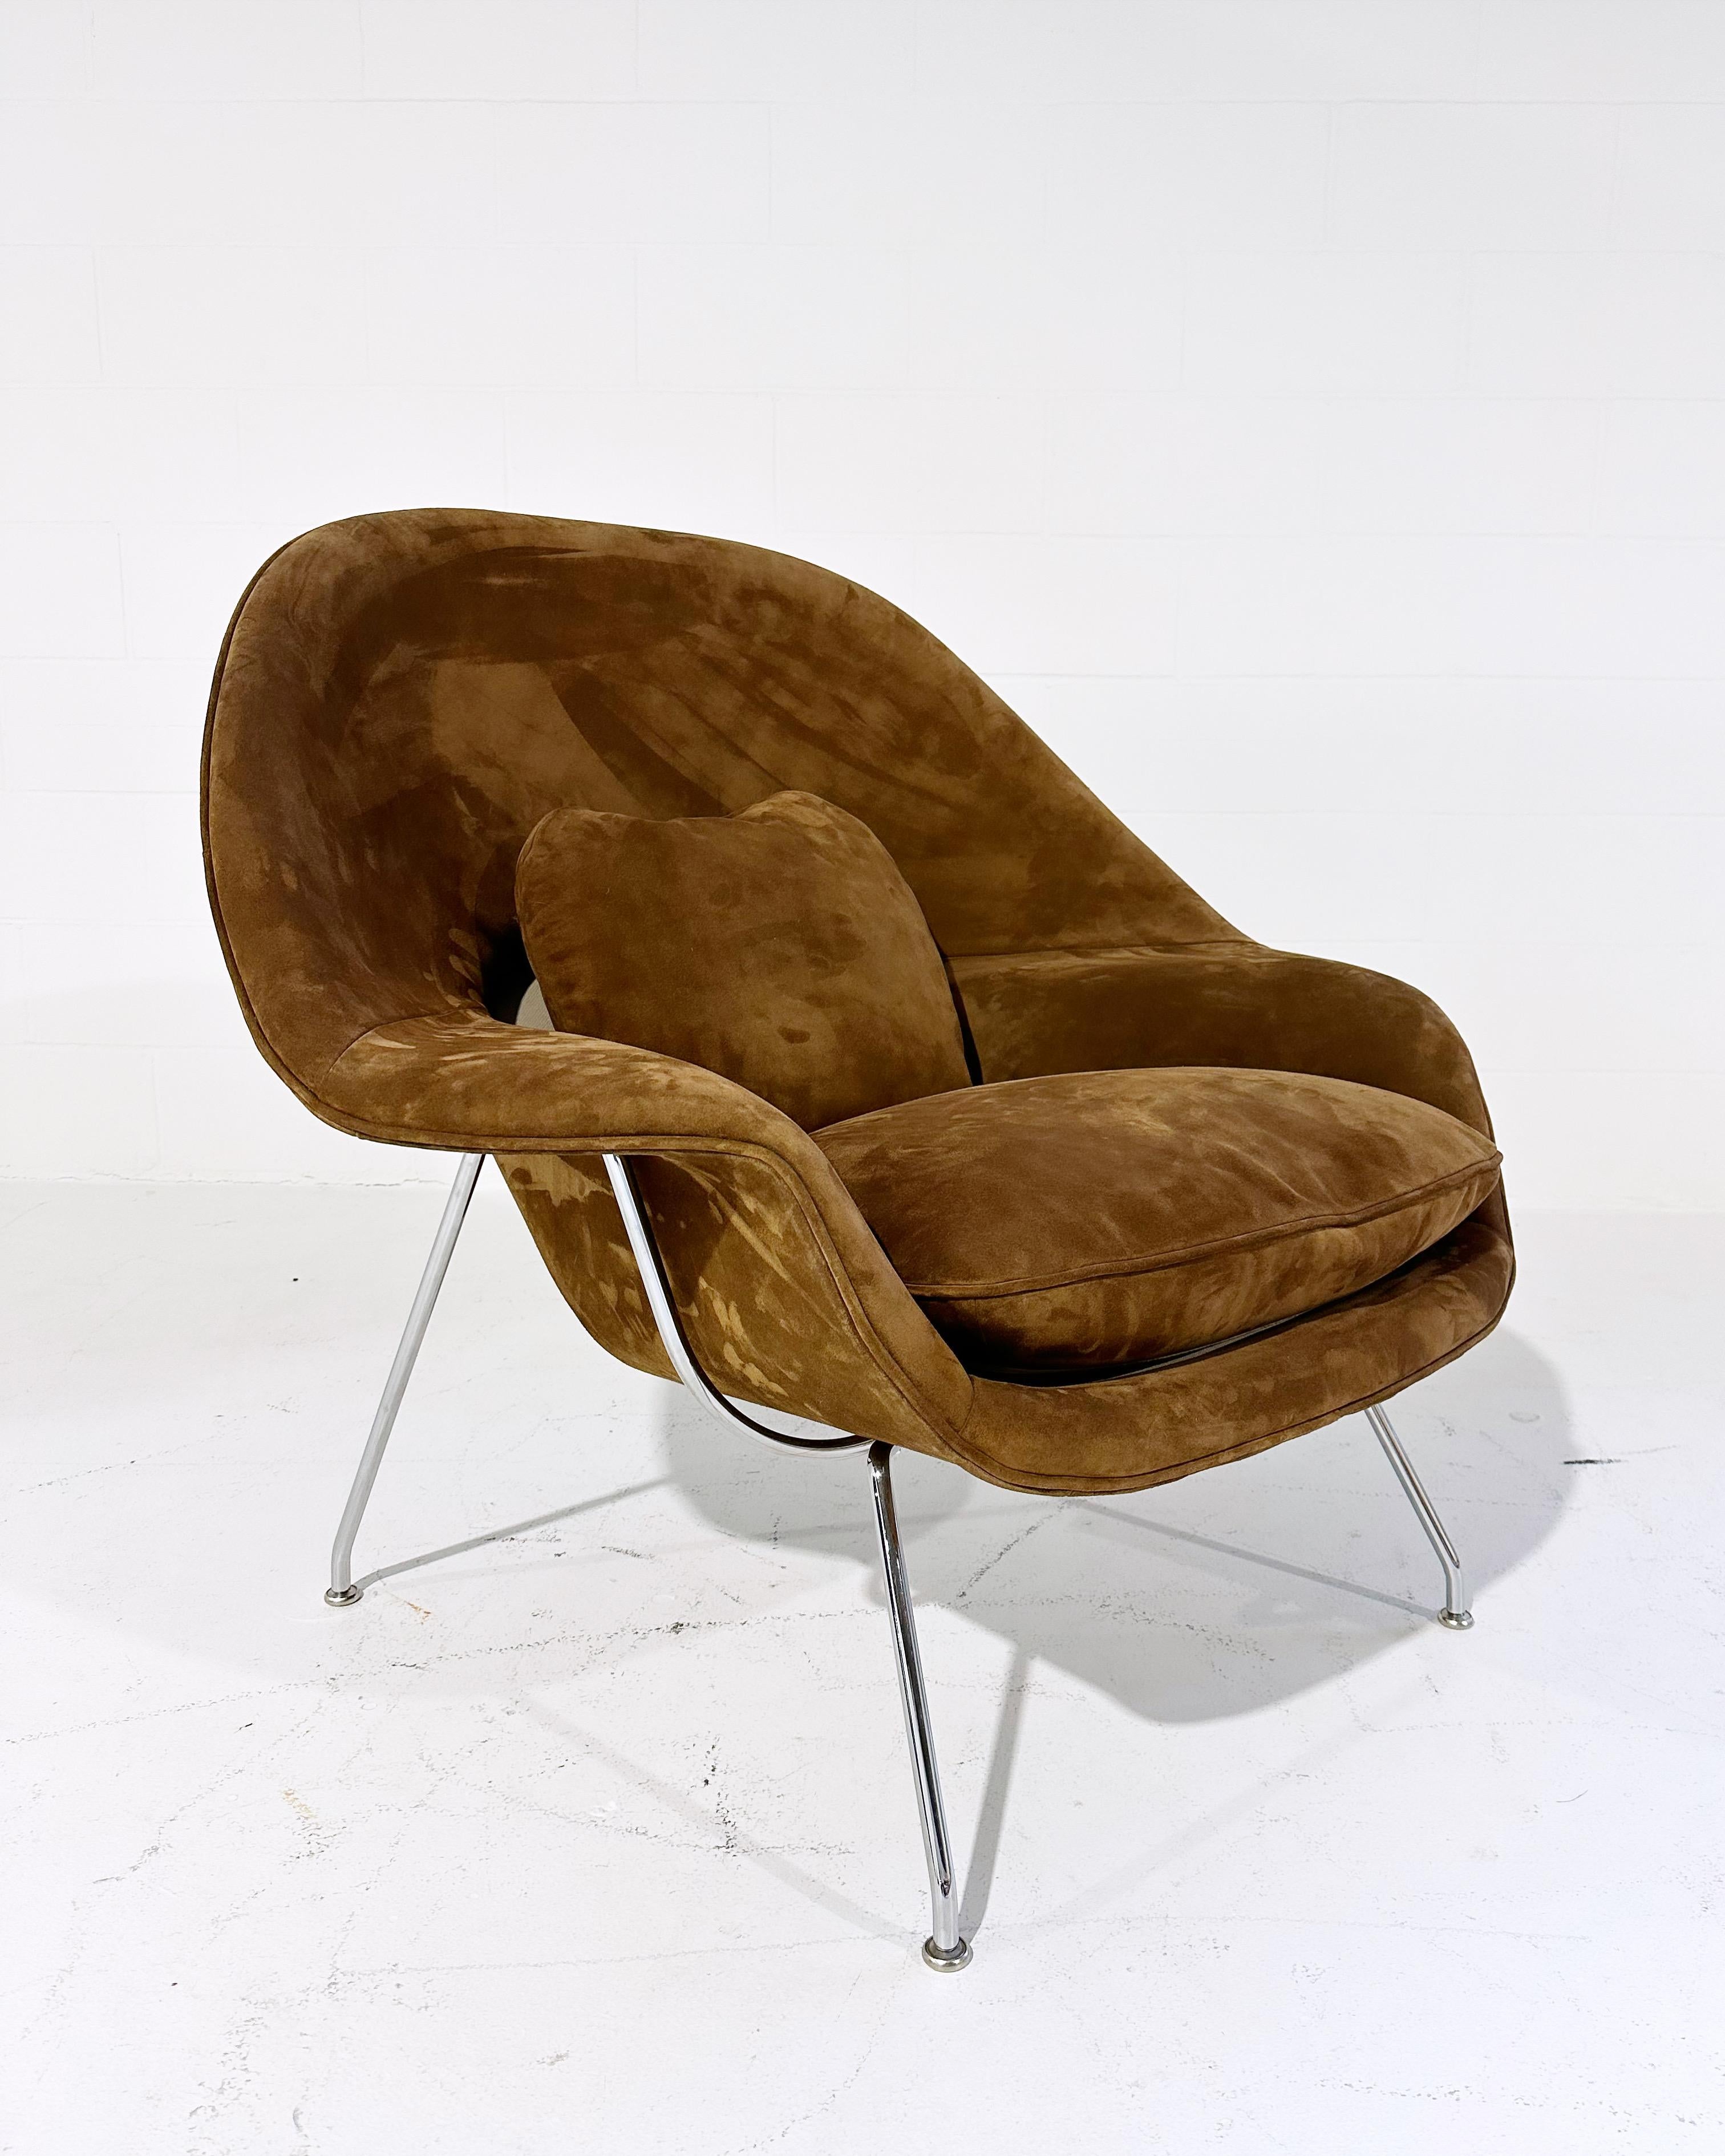 A favorite of the Forsyth design team! 

“Eero Saarinen designed the groundbreaking Womb Chair at Florence Knoll's request for ‘a chair that was like a basket full of pillows - something she could really curl up in.’ This mid-century classic